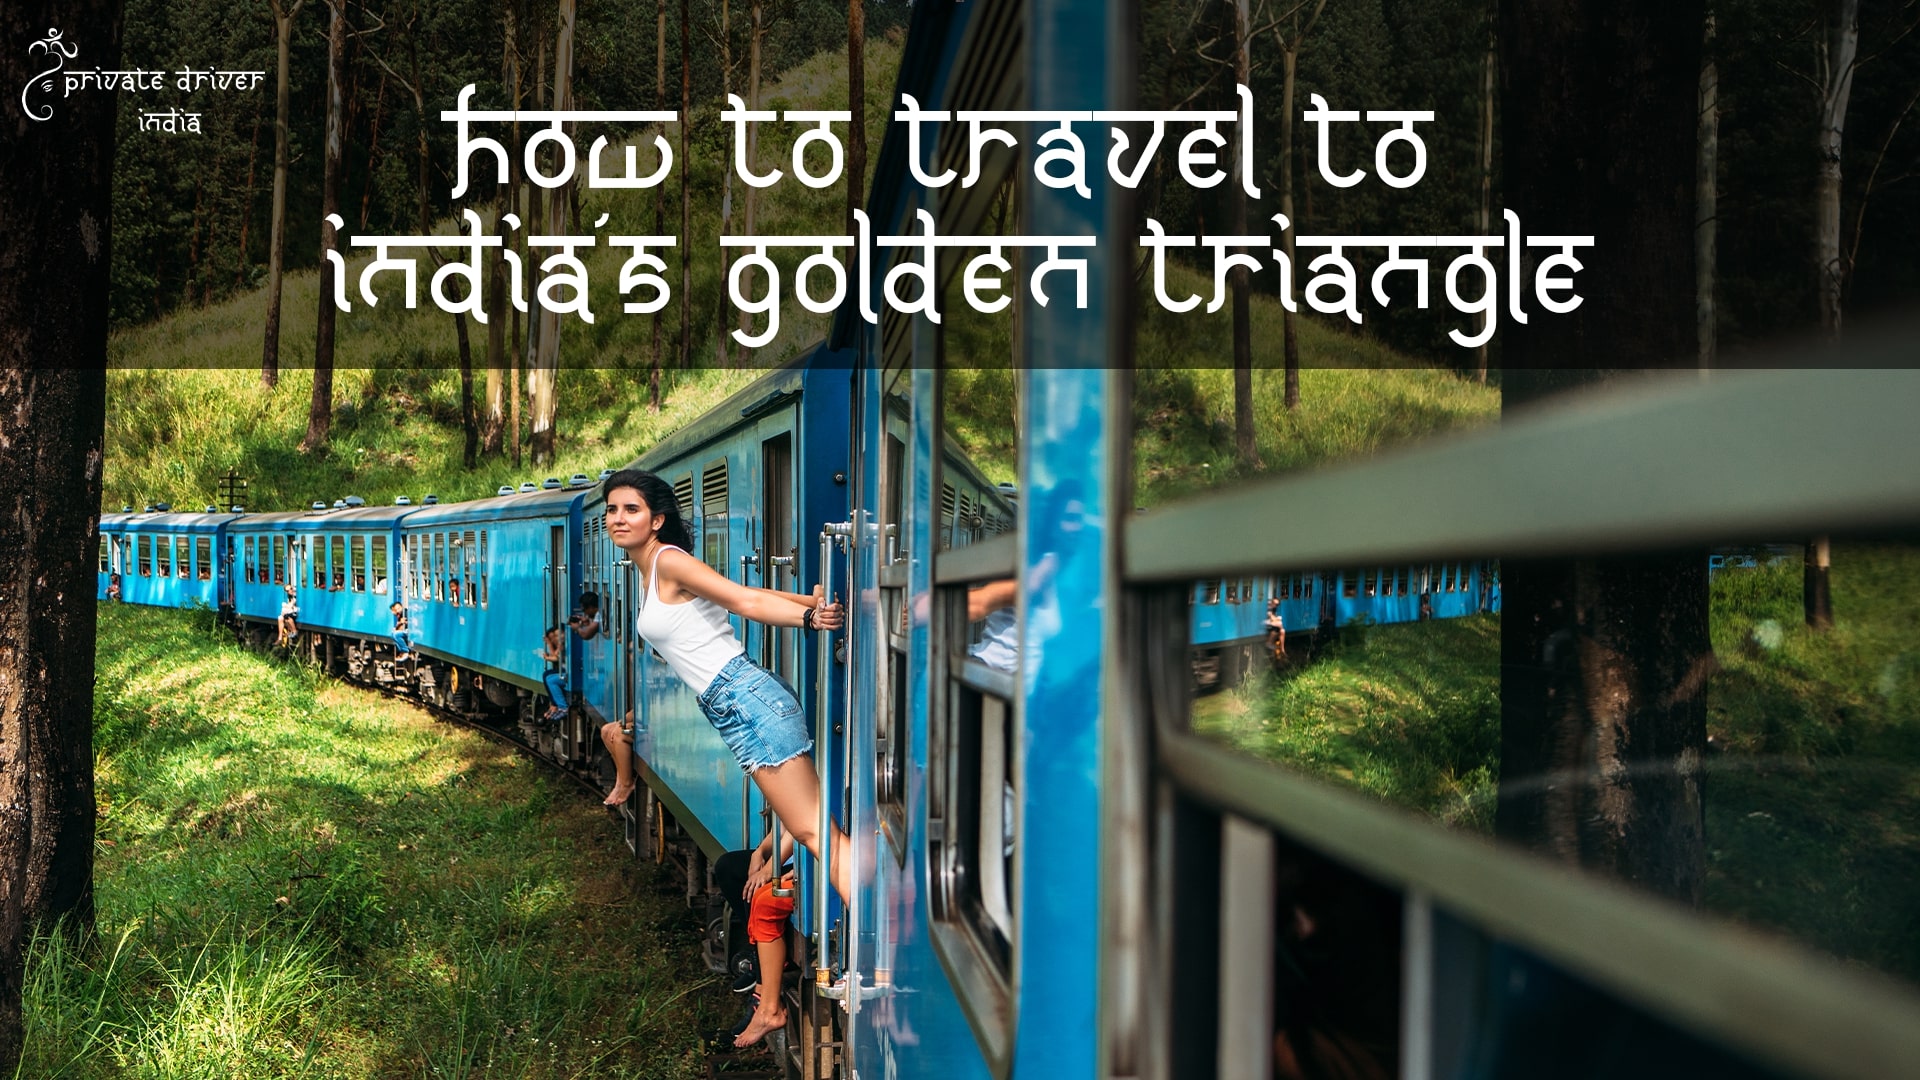 How To Travel To India’s Golden Triangle